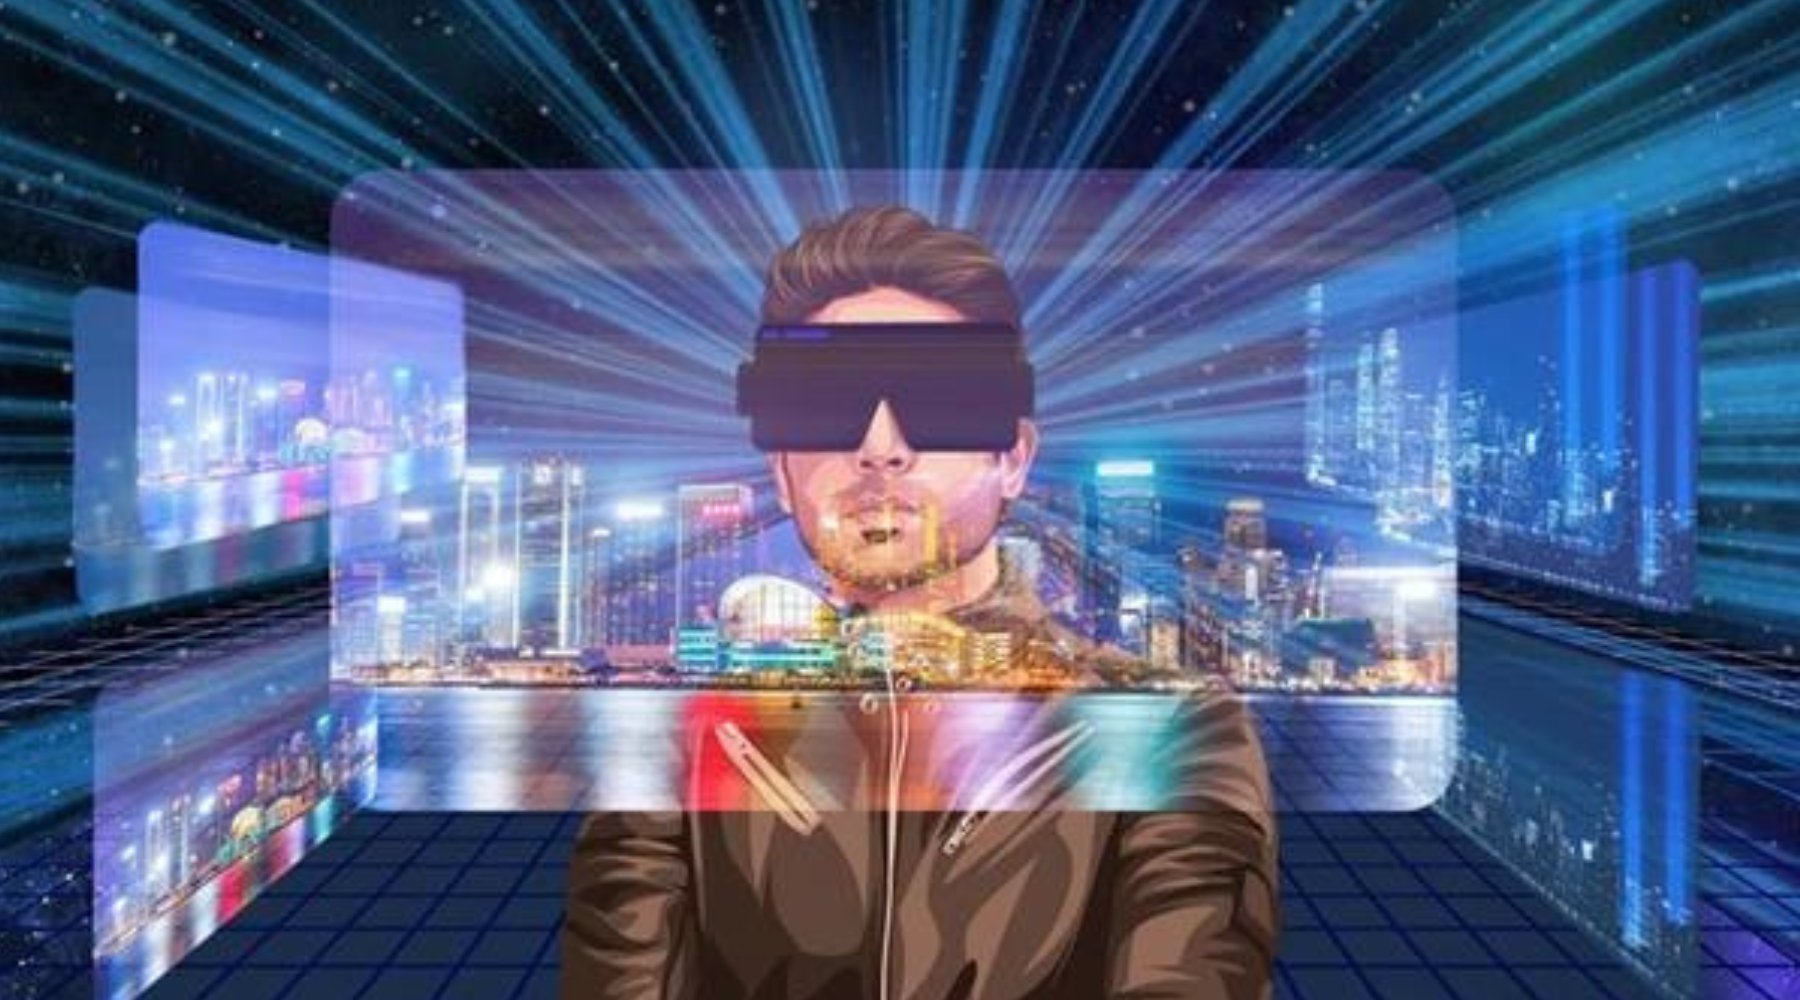 Lost in the Metaverse & The Technology Behind It